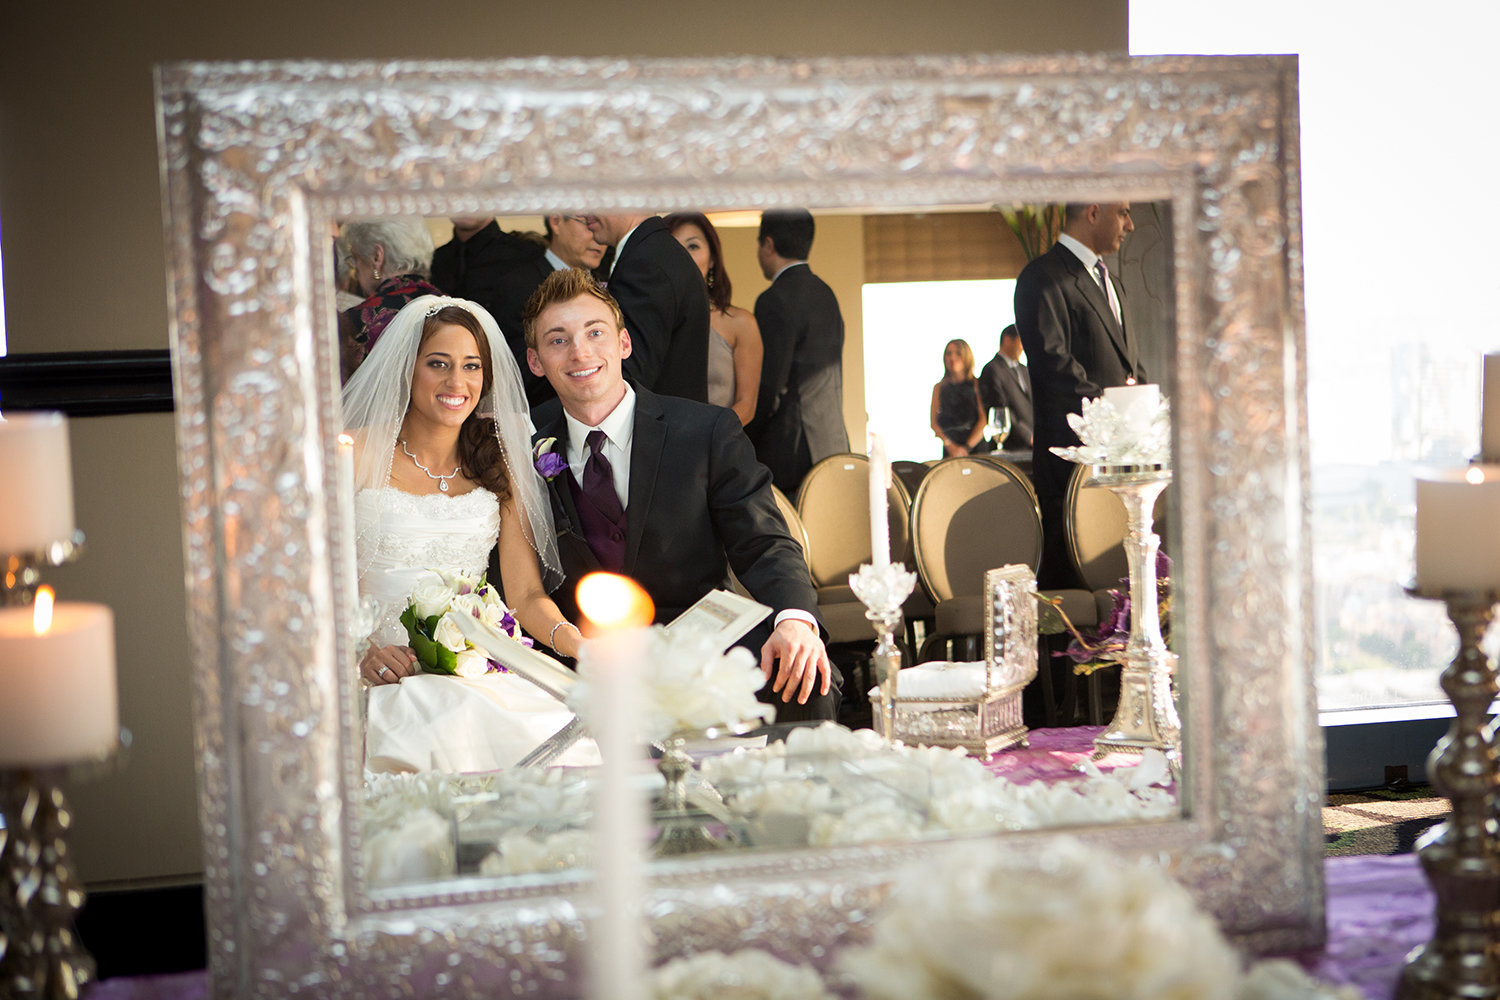 Portrait of bride and groom at persian wedding through mirror